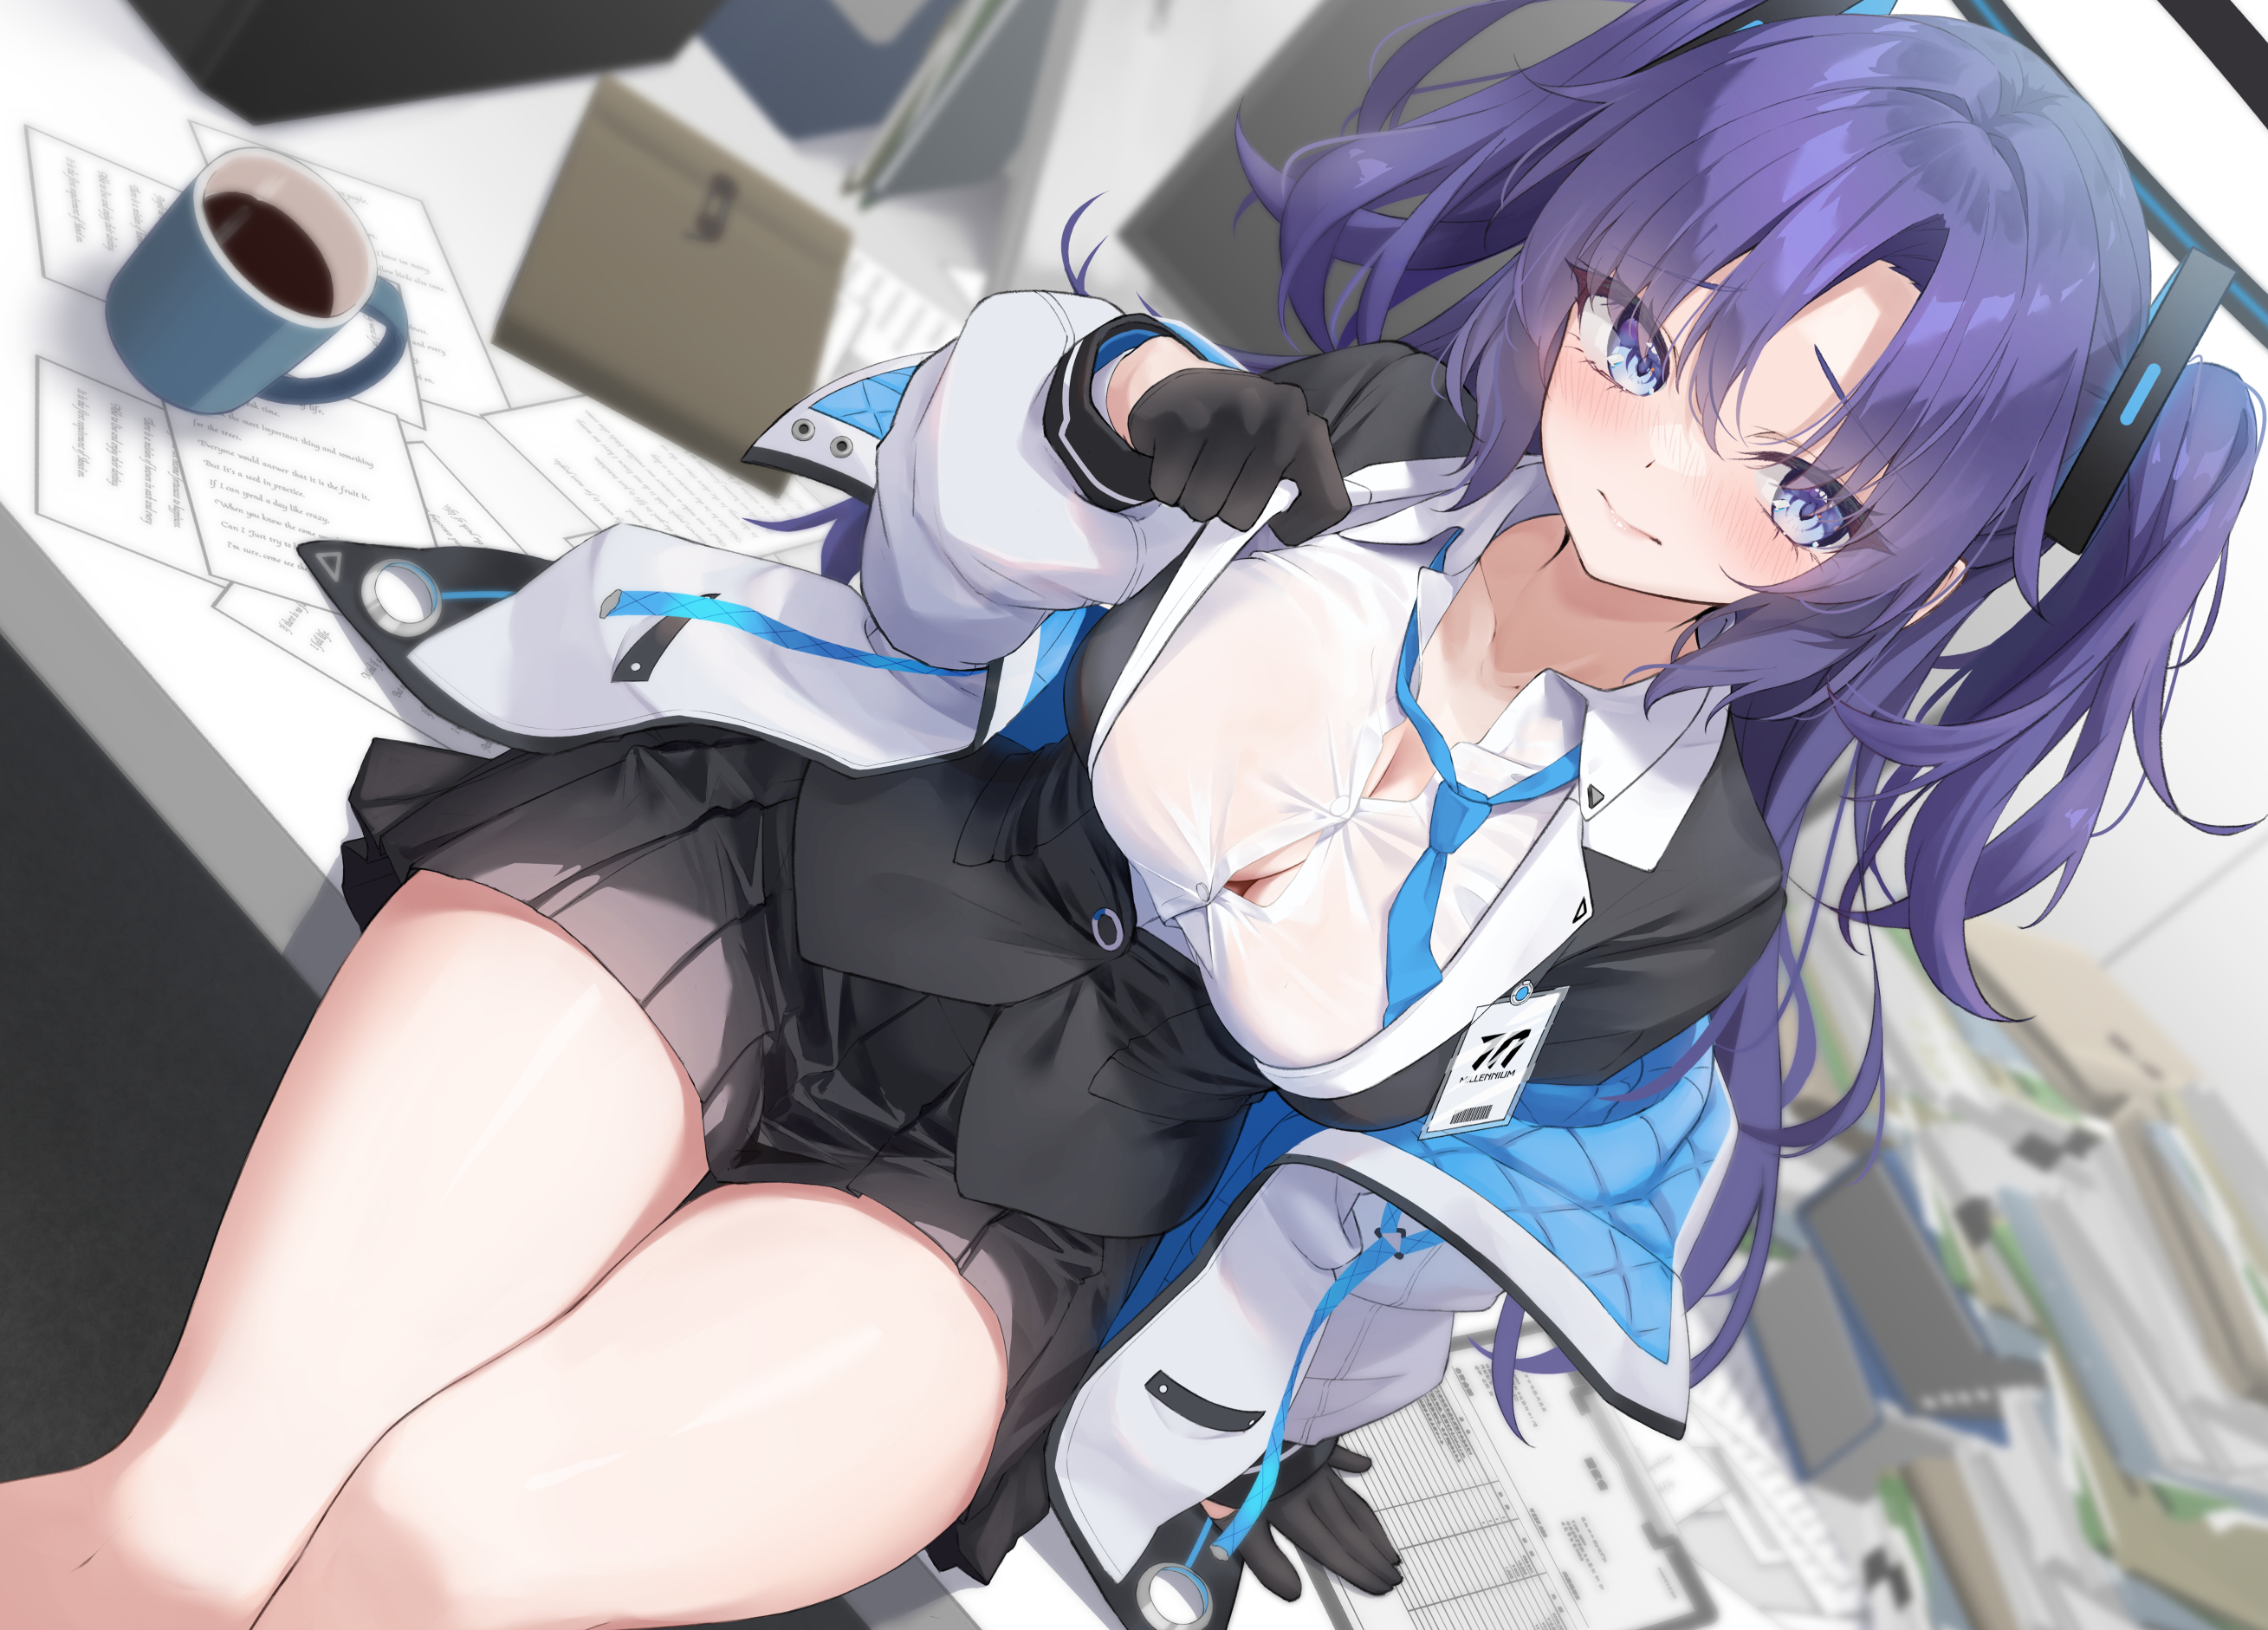 Anime 2618x1881 anime anime girls Hayase Yuuka Blue Archive Mirea looking at viewer closed mouth blushing sitting off shoulder long hair twintails drink cup coffee purple hair blue eyes ID card thighs skirt paper envelope clipboards desk necktie blue tie tie jacket black gloves gloves office boobs cleavage open jacket bright